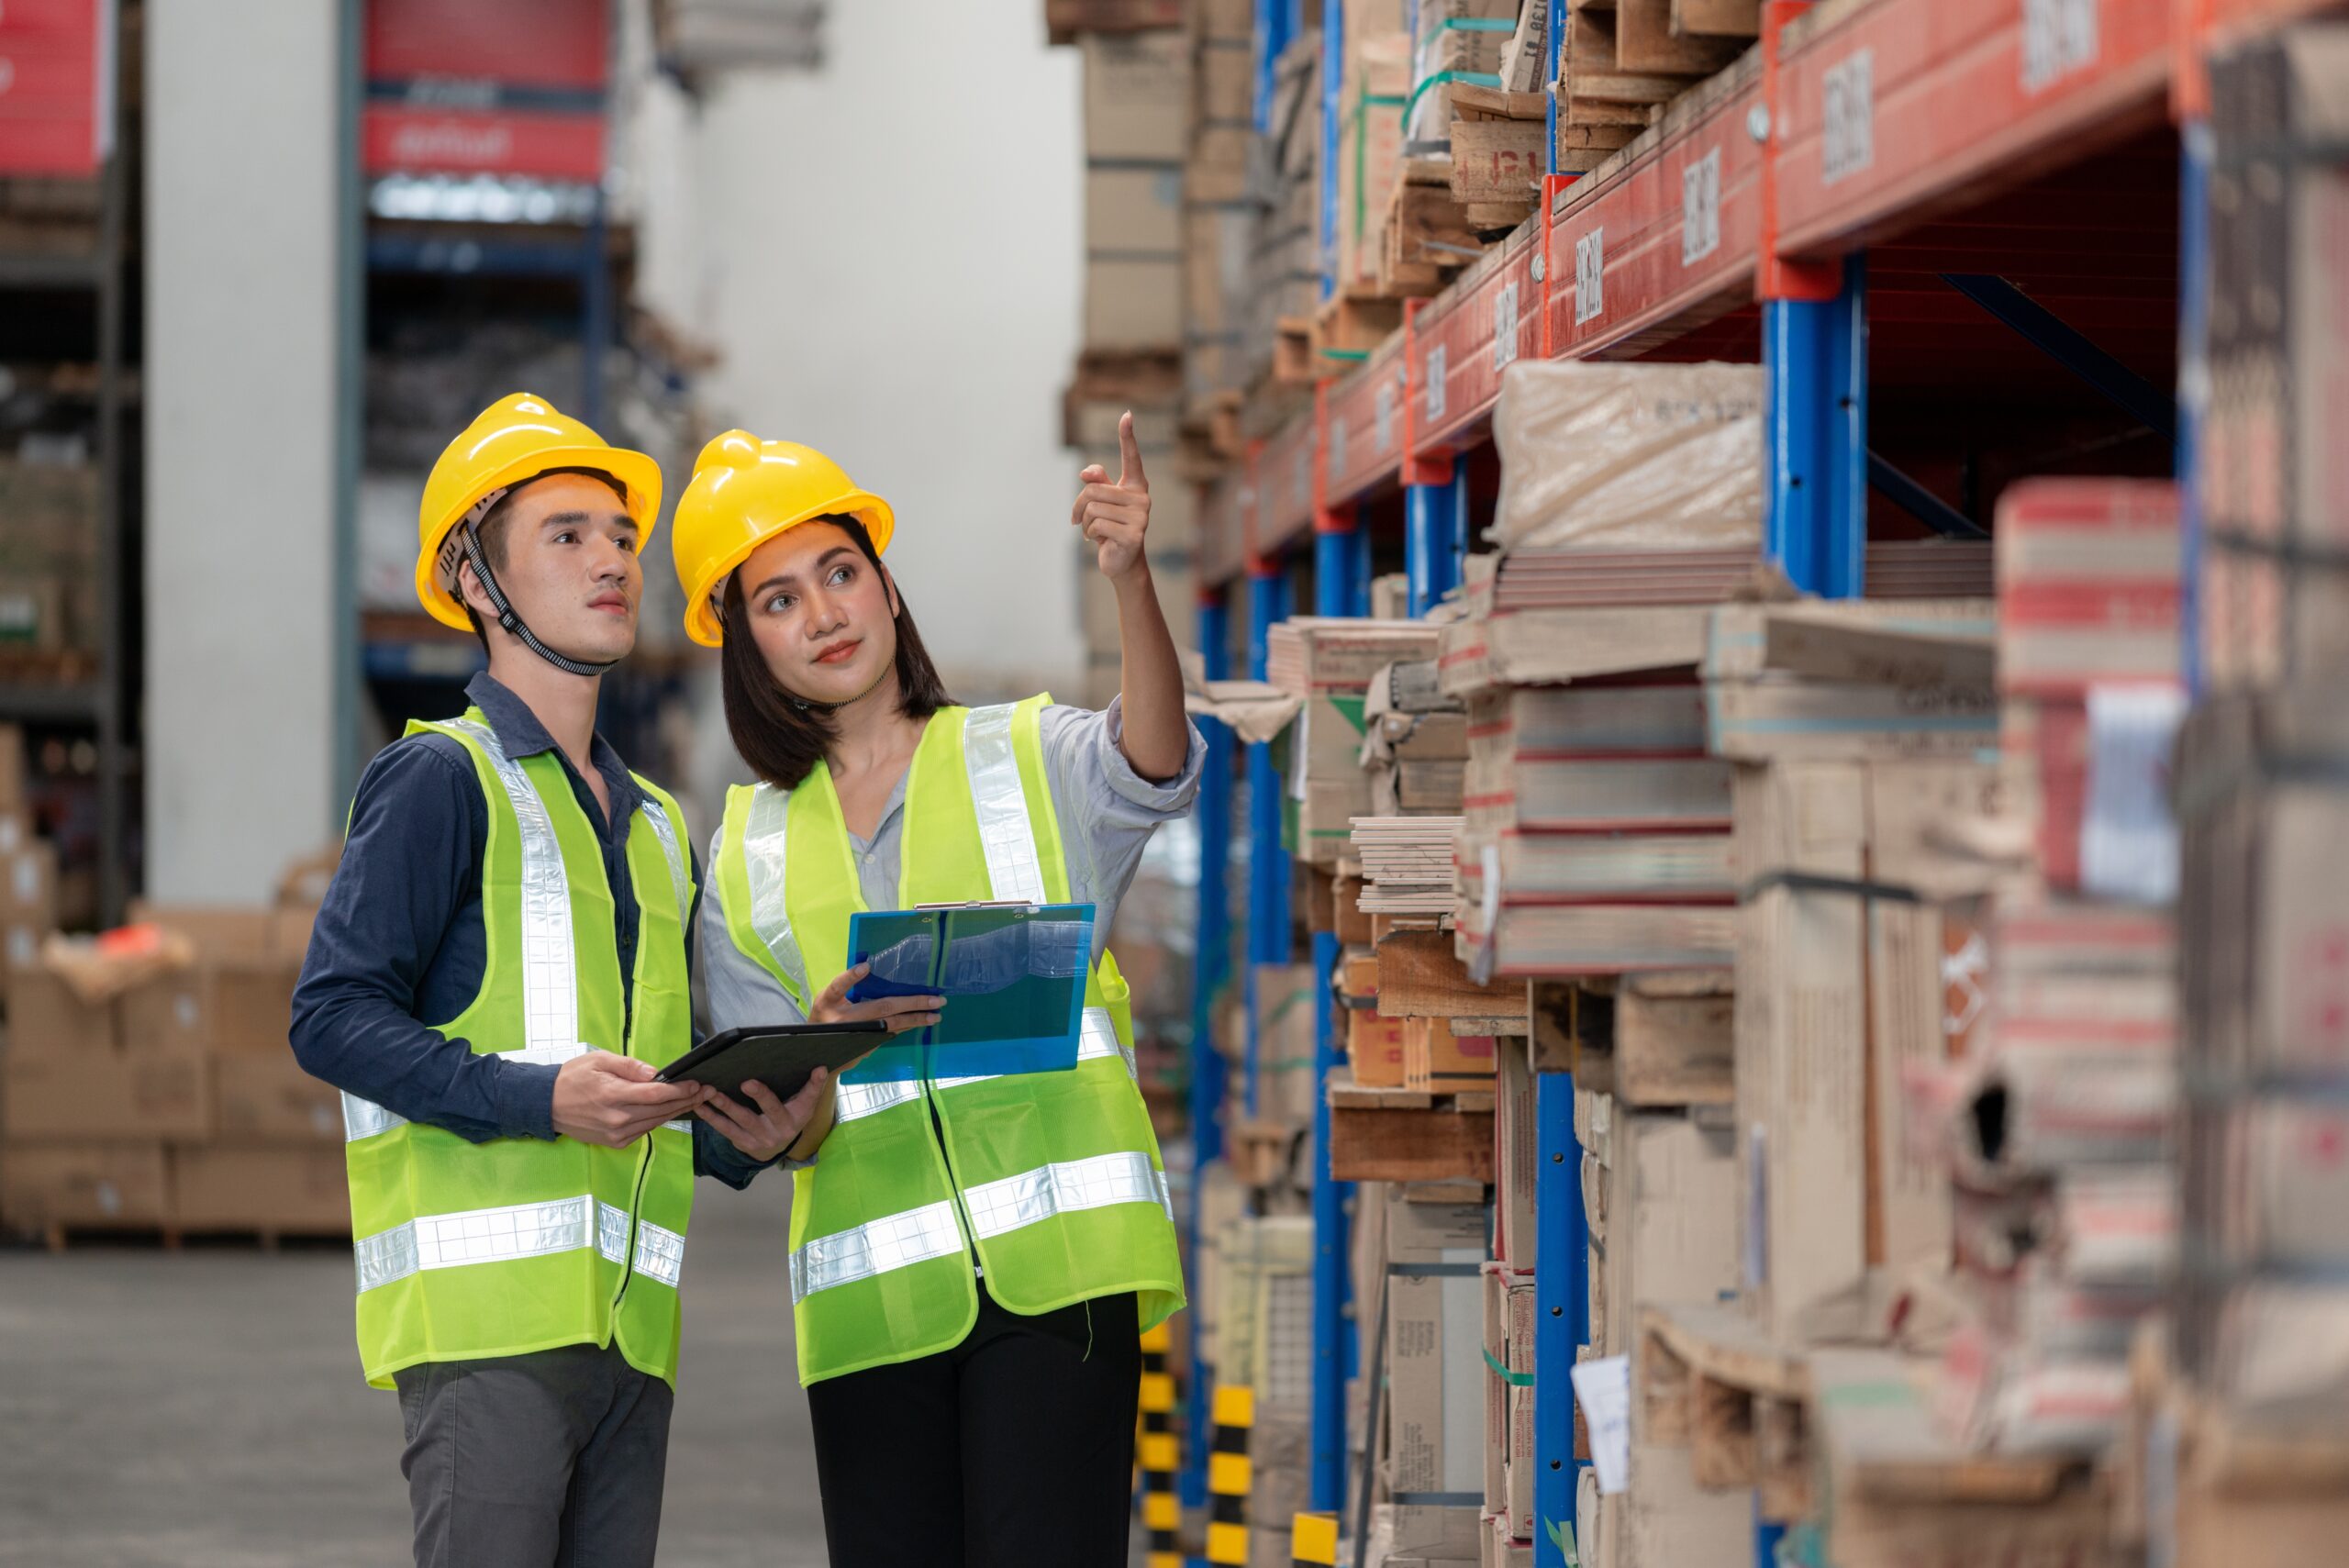 Warehouse,Worker,Checking,Packages,On,Shelf,In,A,Large,Store